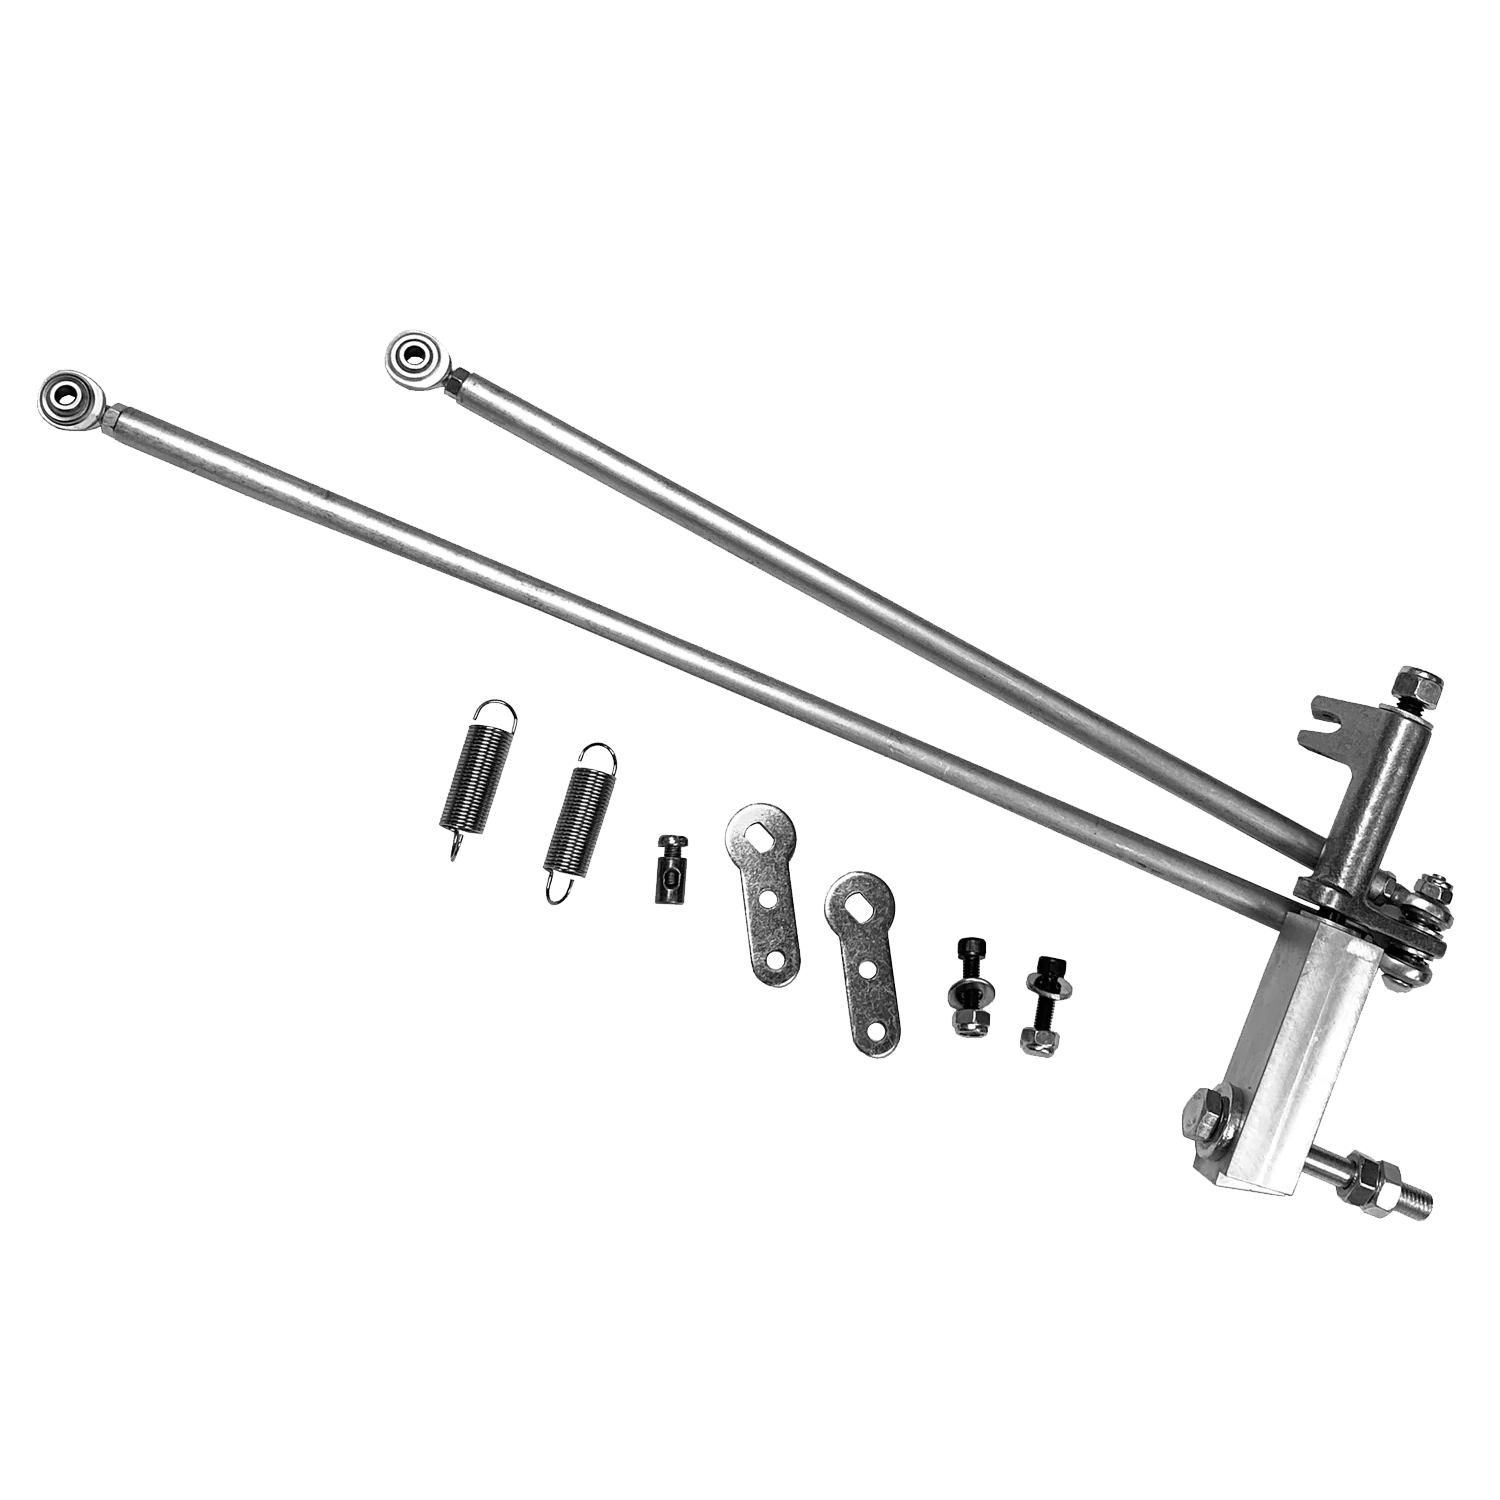 Heim joint linkage for dual Solex H40/44EIS